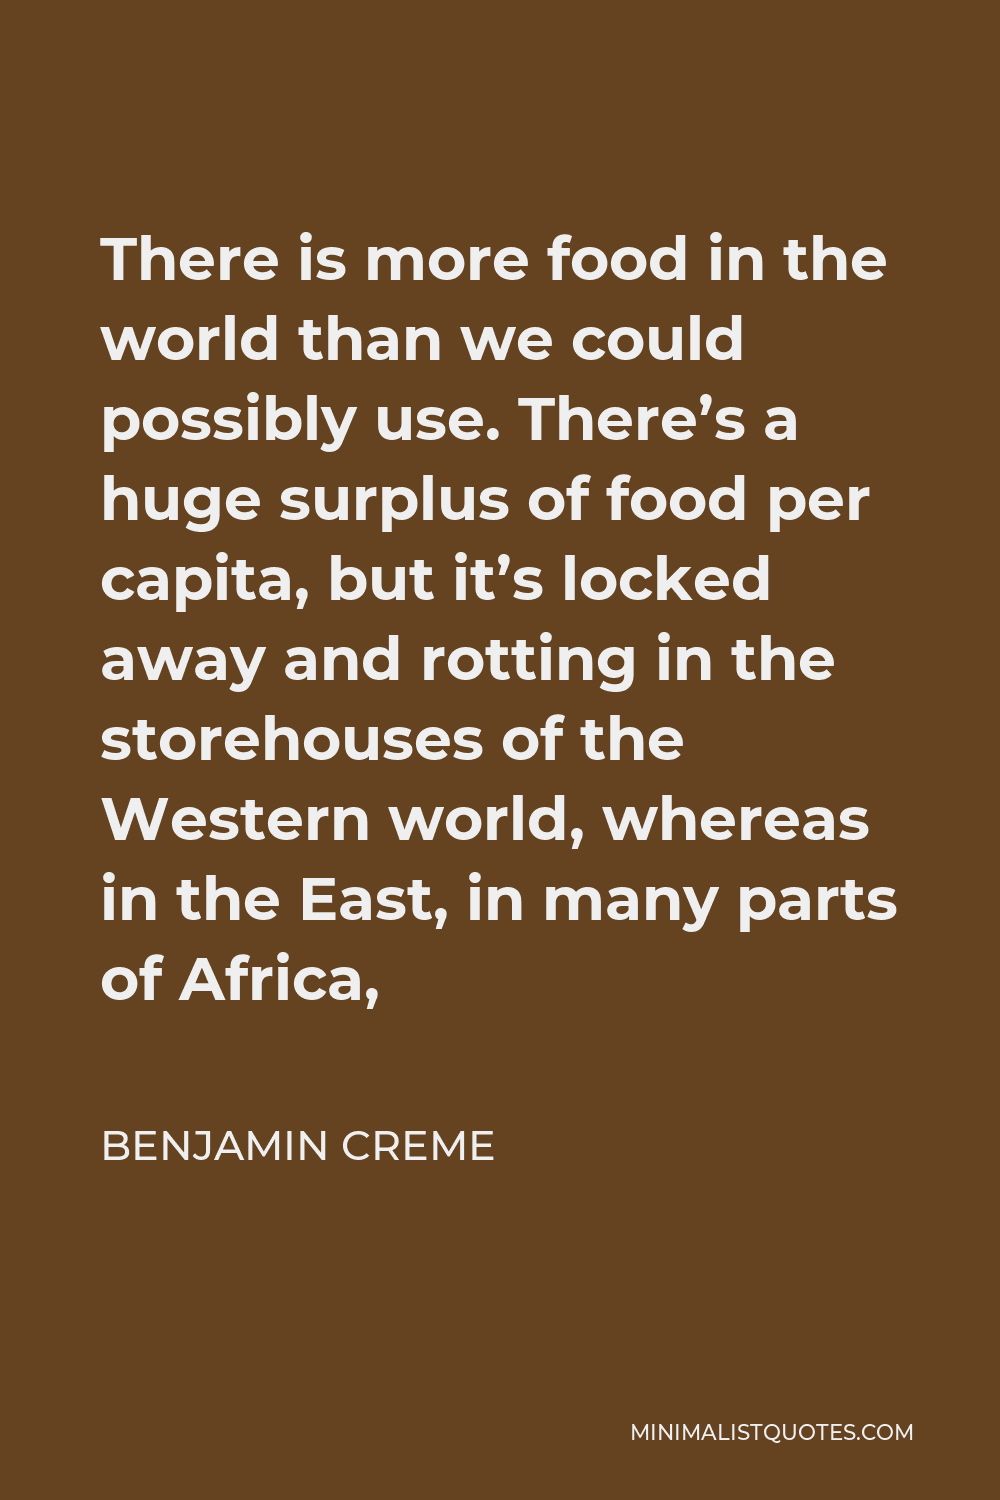 Benjamin Creme Quote - There is more food in the world than we could possibly use. There’s a huge surplus of food per capita, but it’s locked away and rotting in the storehouses of the Western world, whereas in the East, in many parts of Africa,